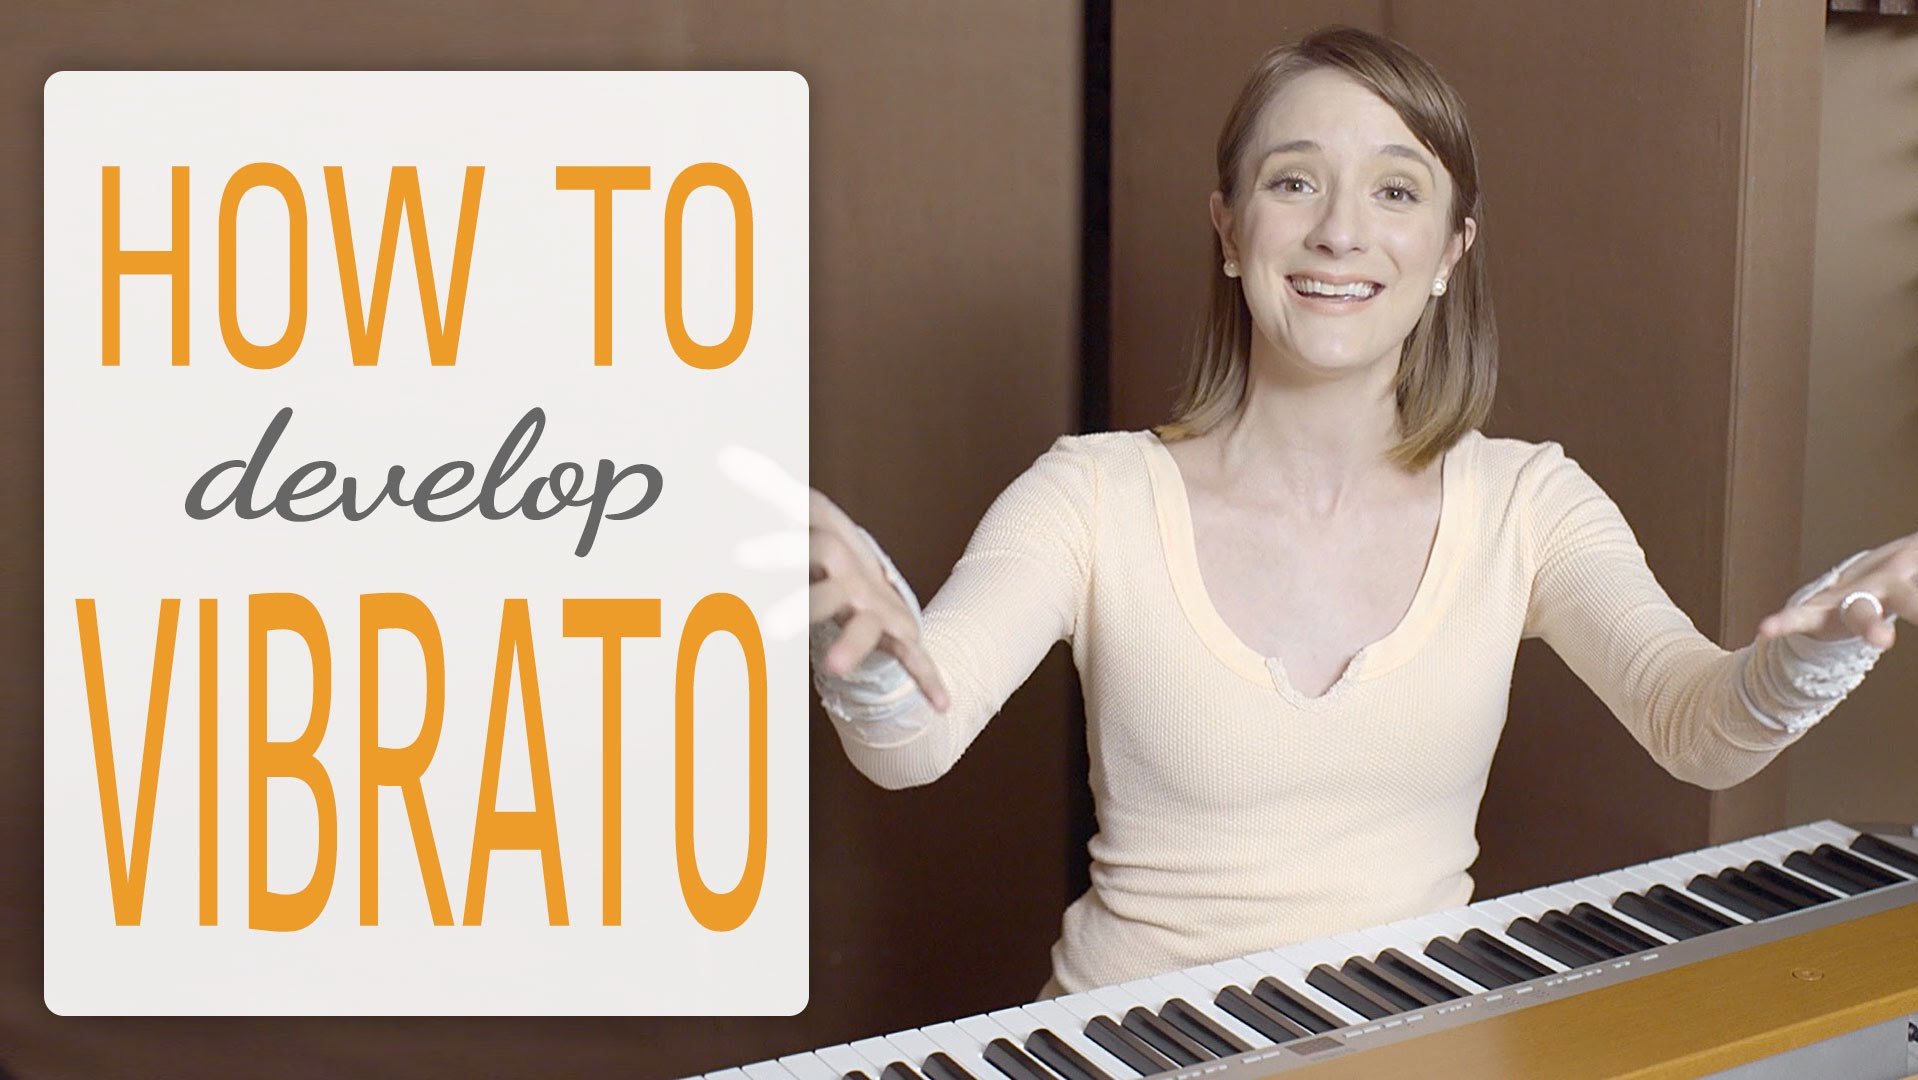 More information about "How to develop Vibrato"